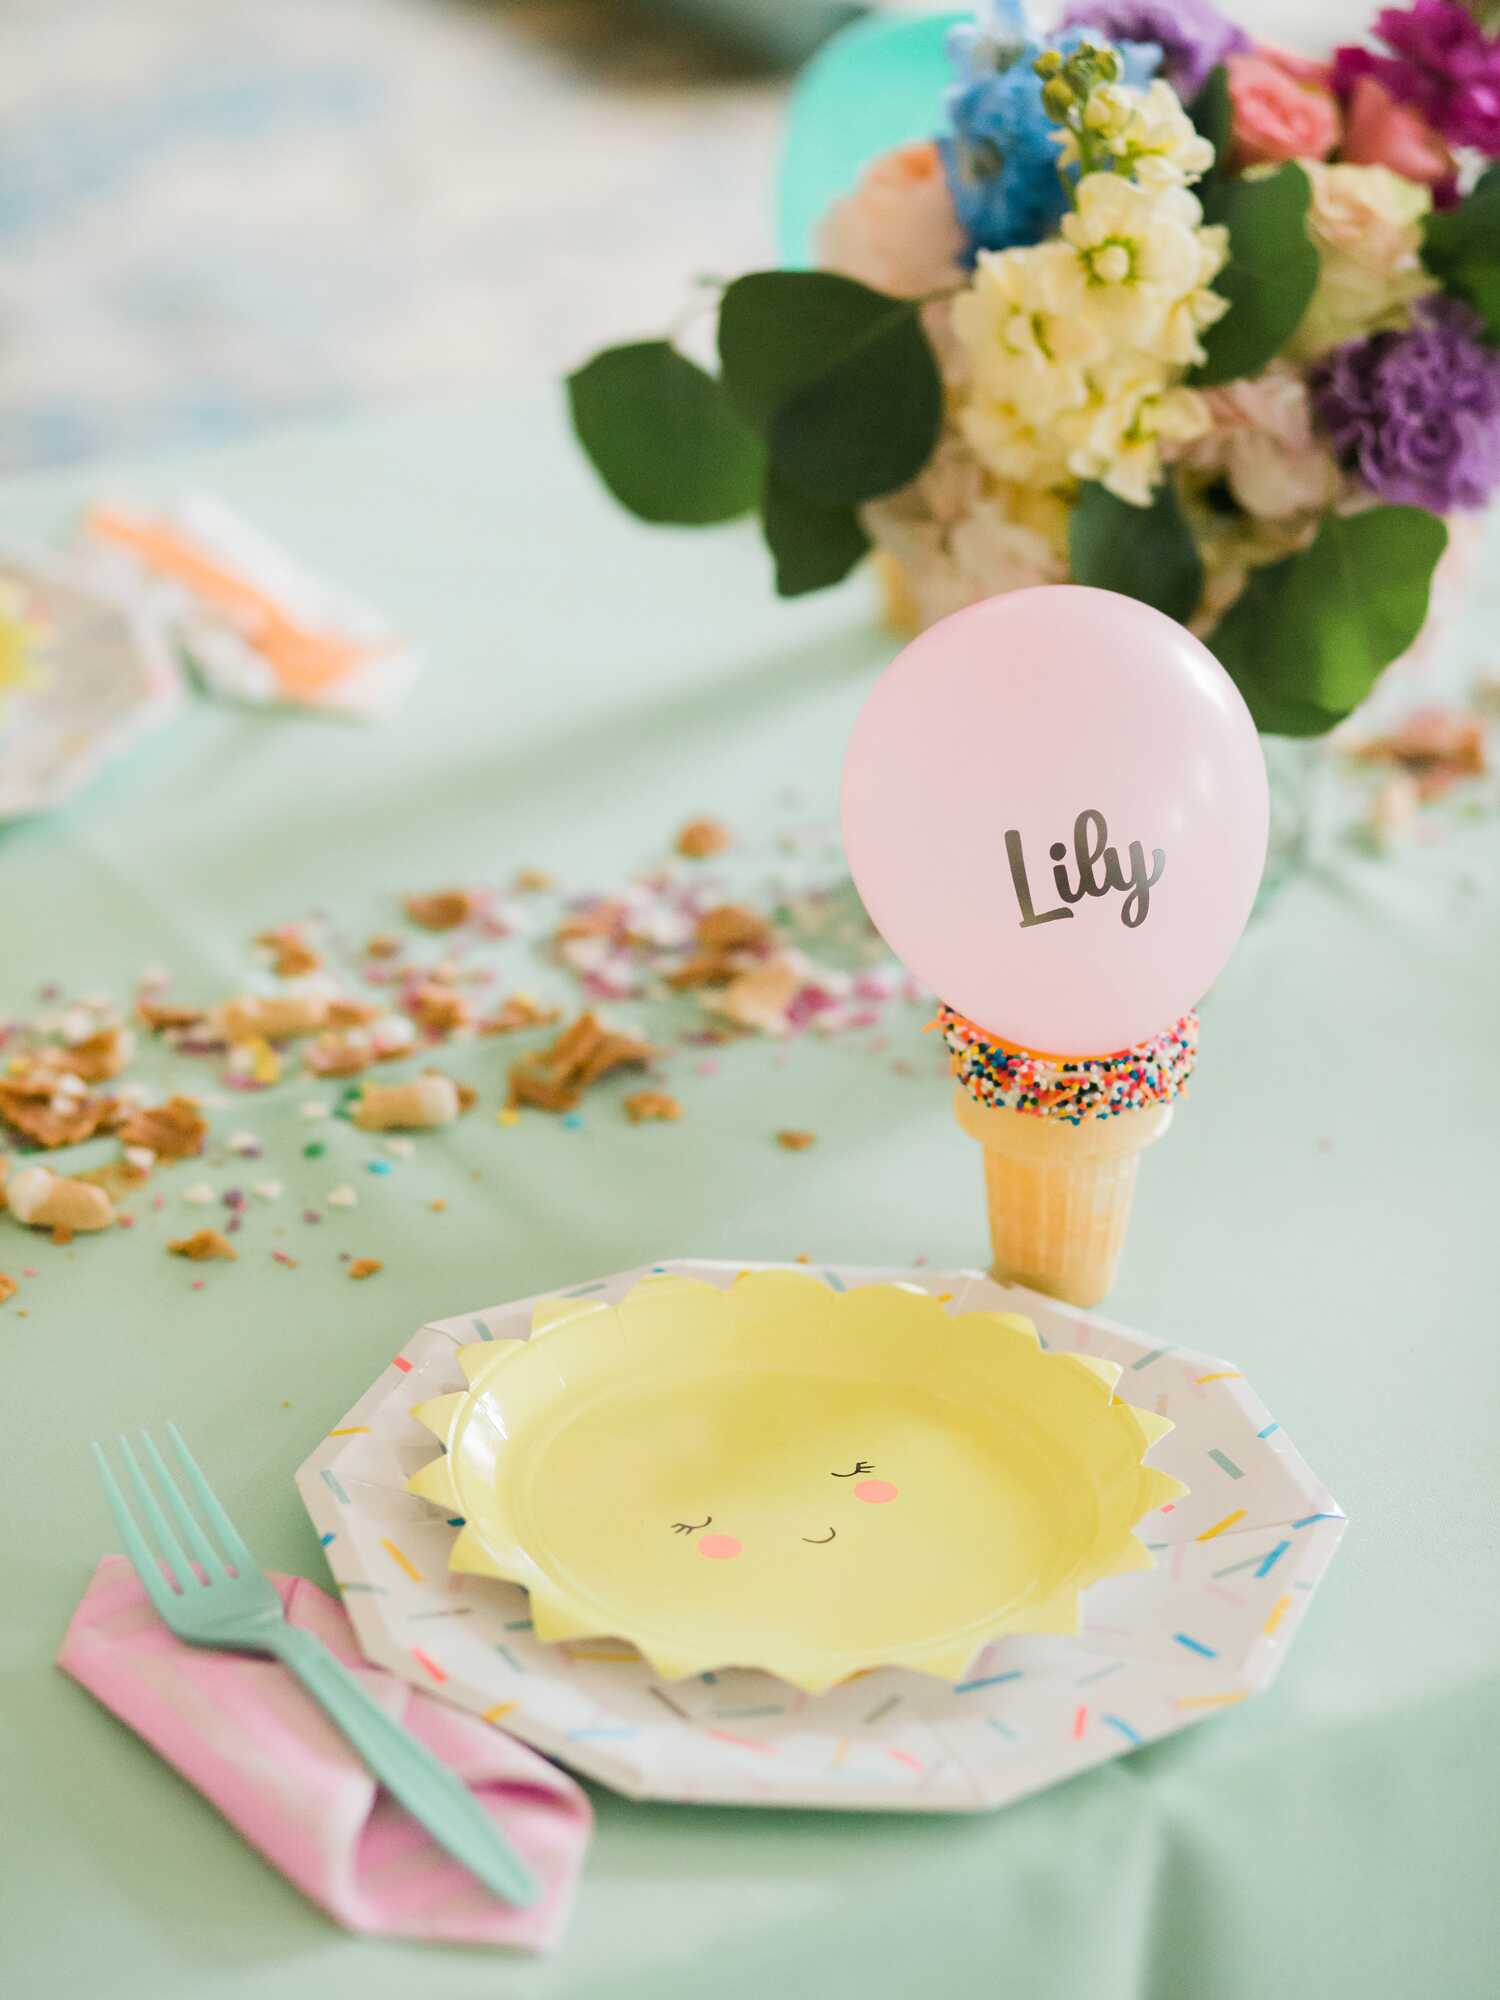 Small pink balloon name card attached to an ice cream cone